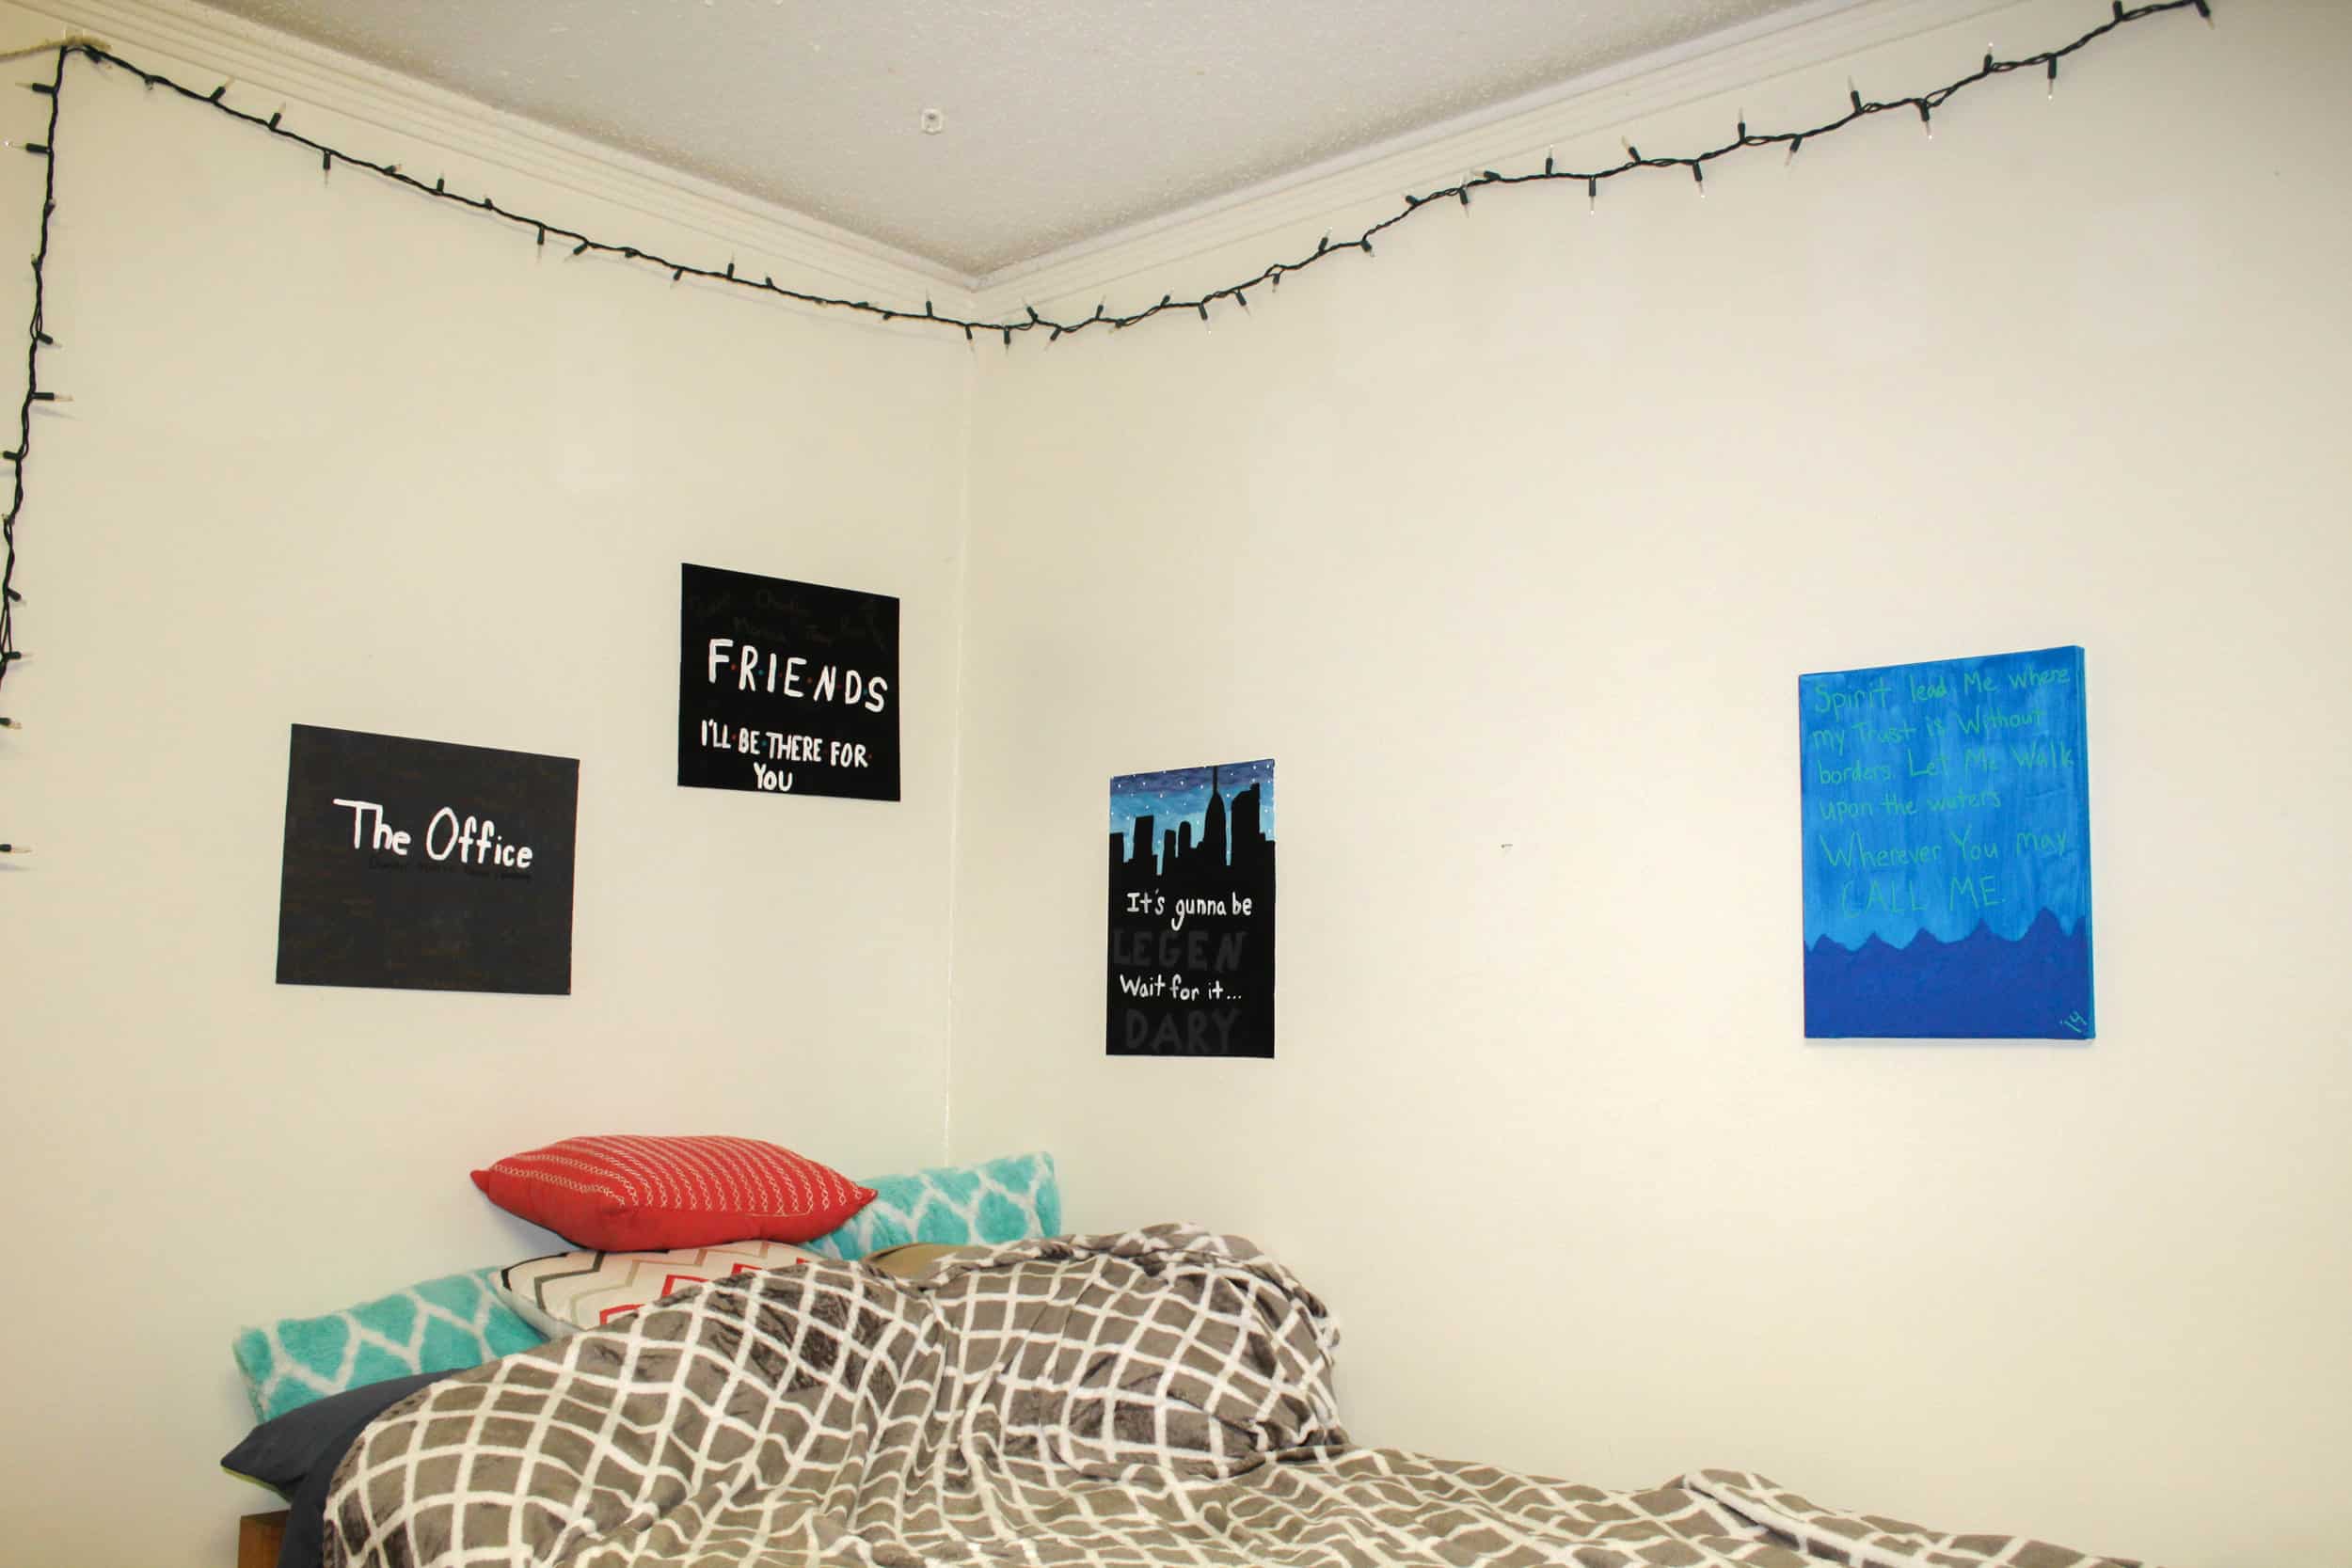 Kayla Gibson, senior, shows her love for multiple TV shows by hanging painted canvases in her room displaying their titles.